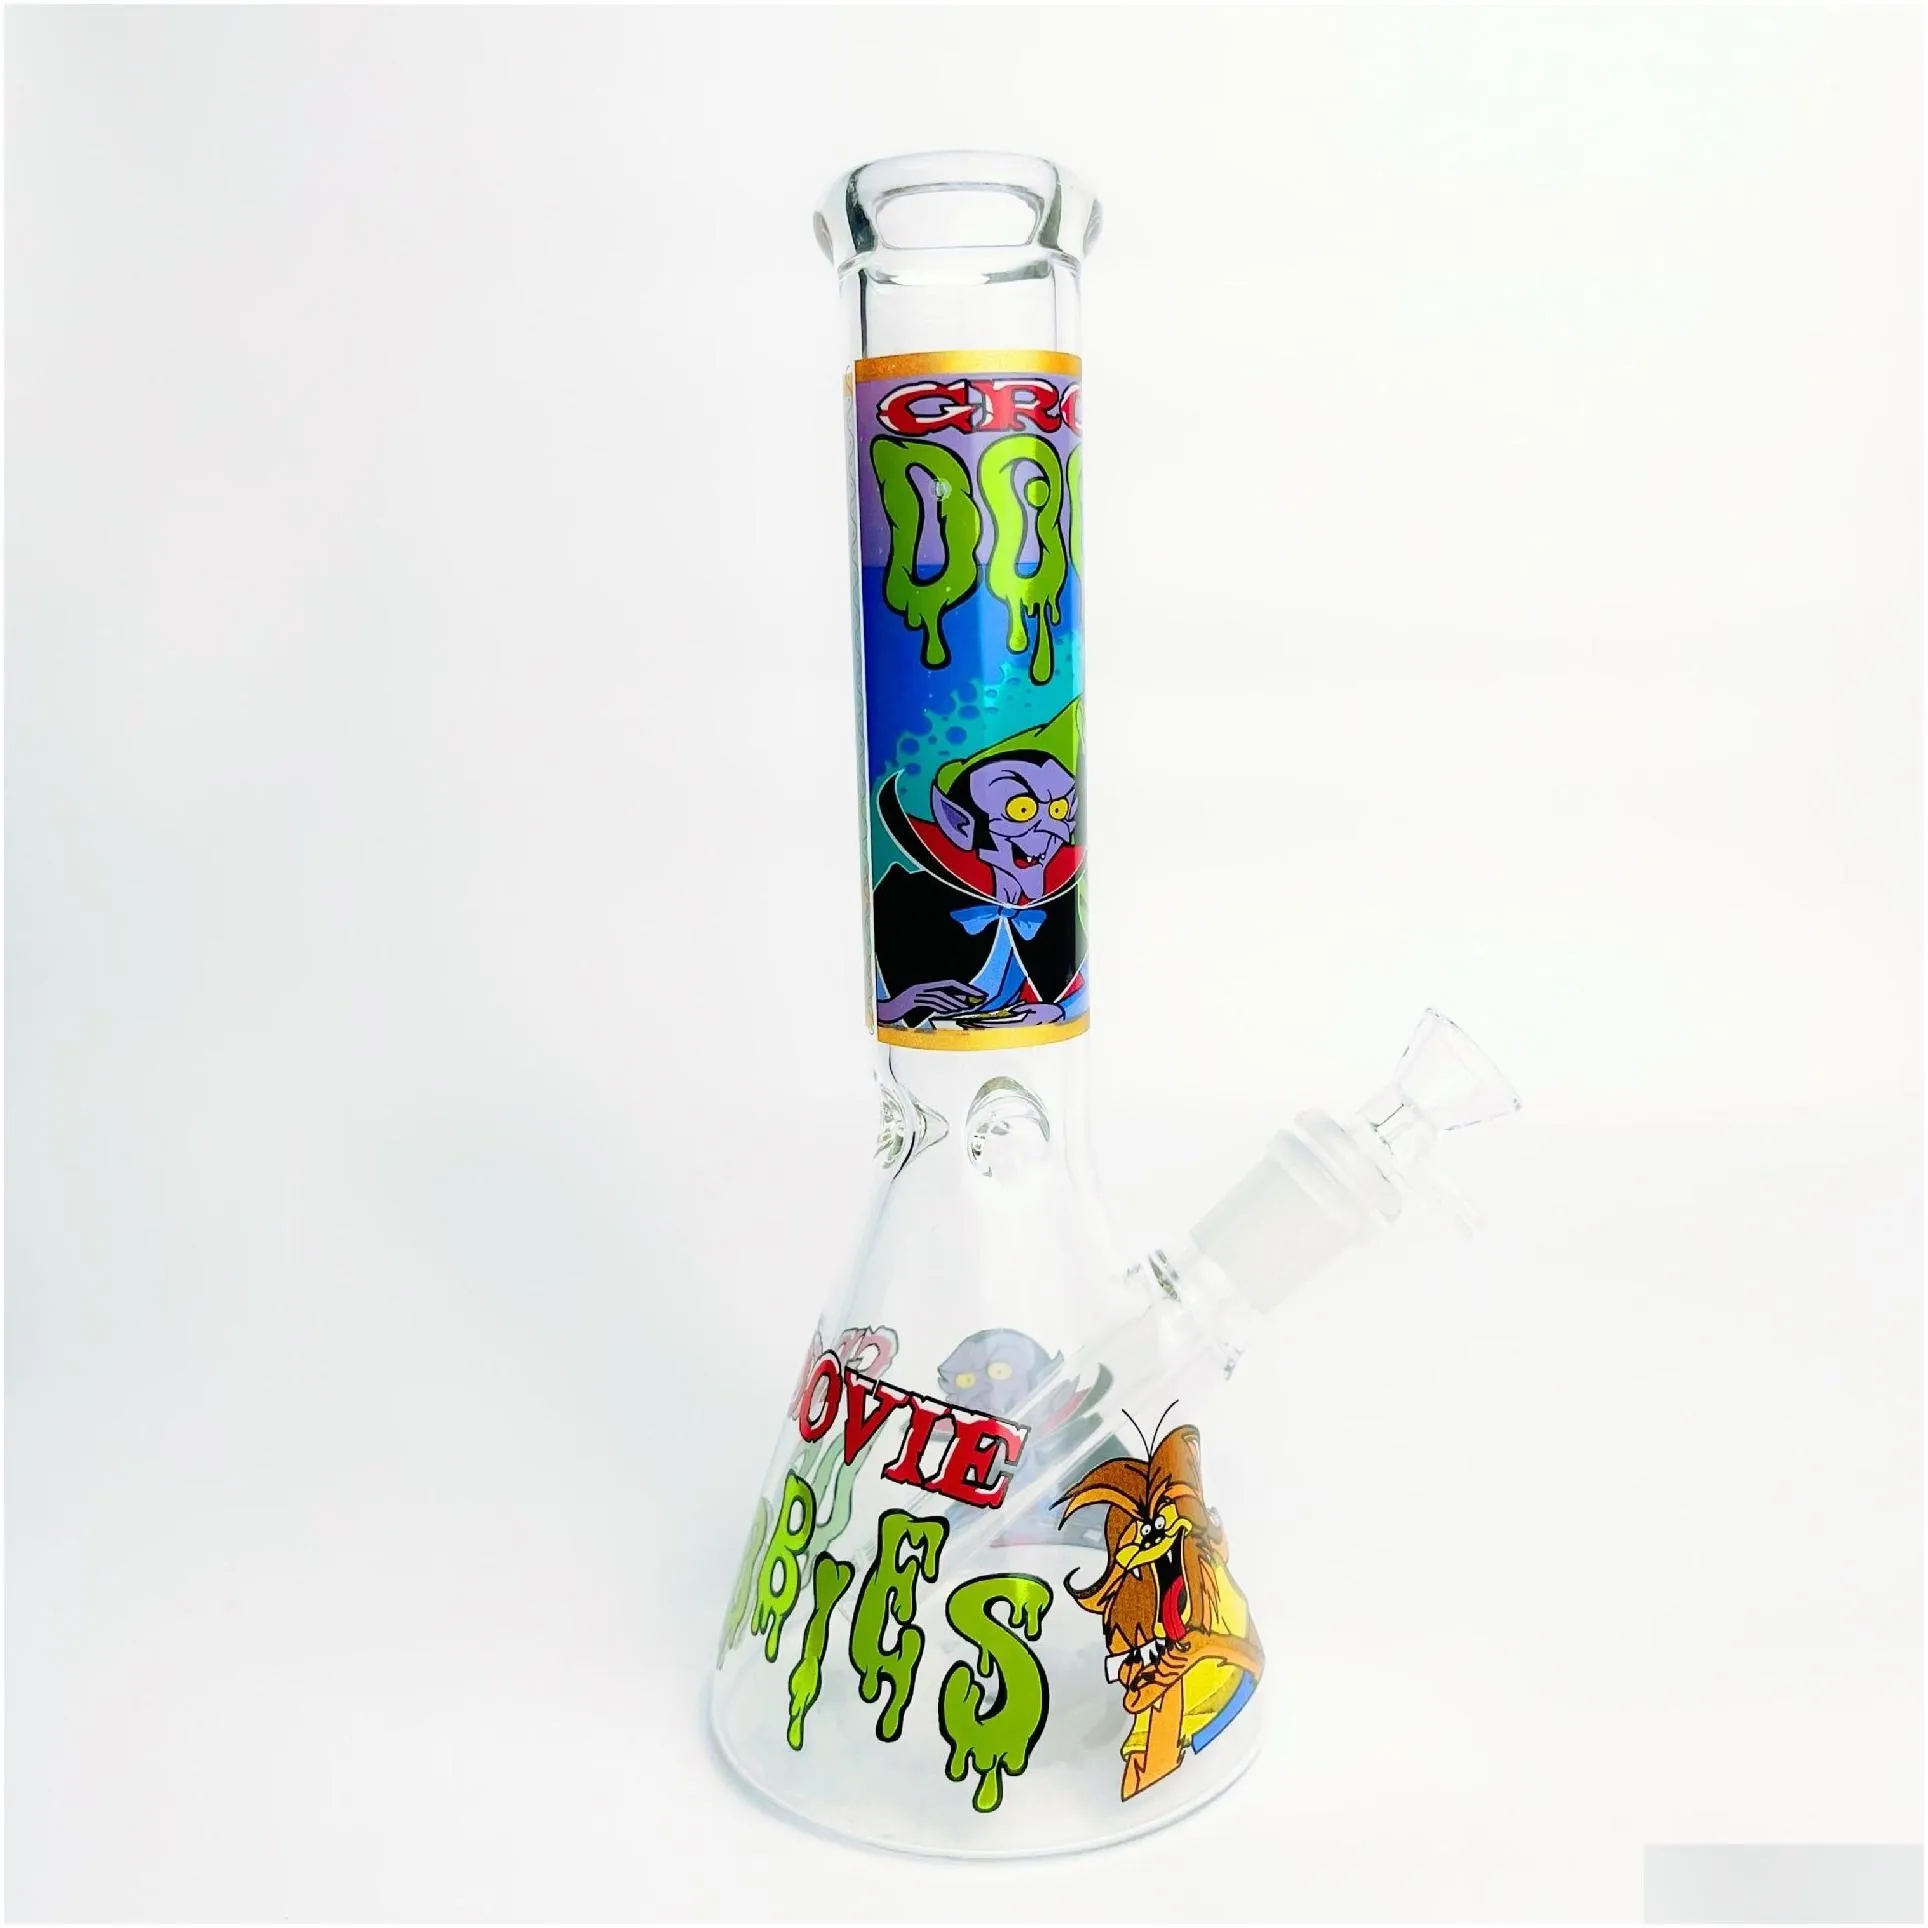 hookahs 4mm thickness luminus decal beaker bong 9.8 heady glass bongs straight bong with ice catches retro american cartoon style tobacco smoking